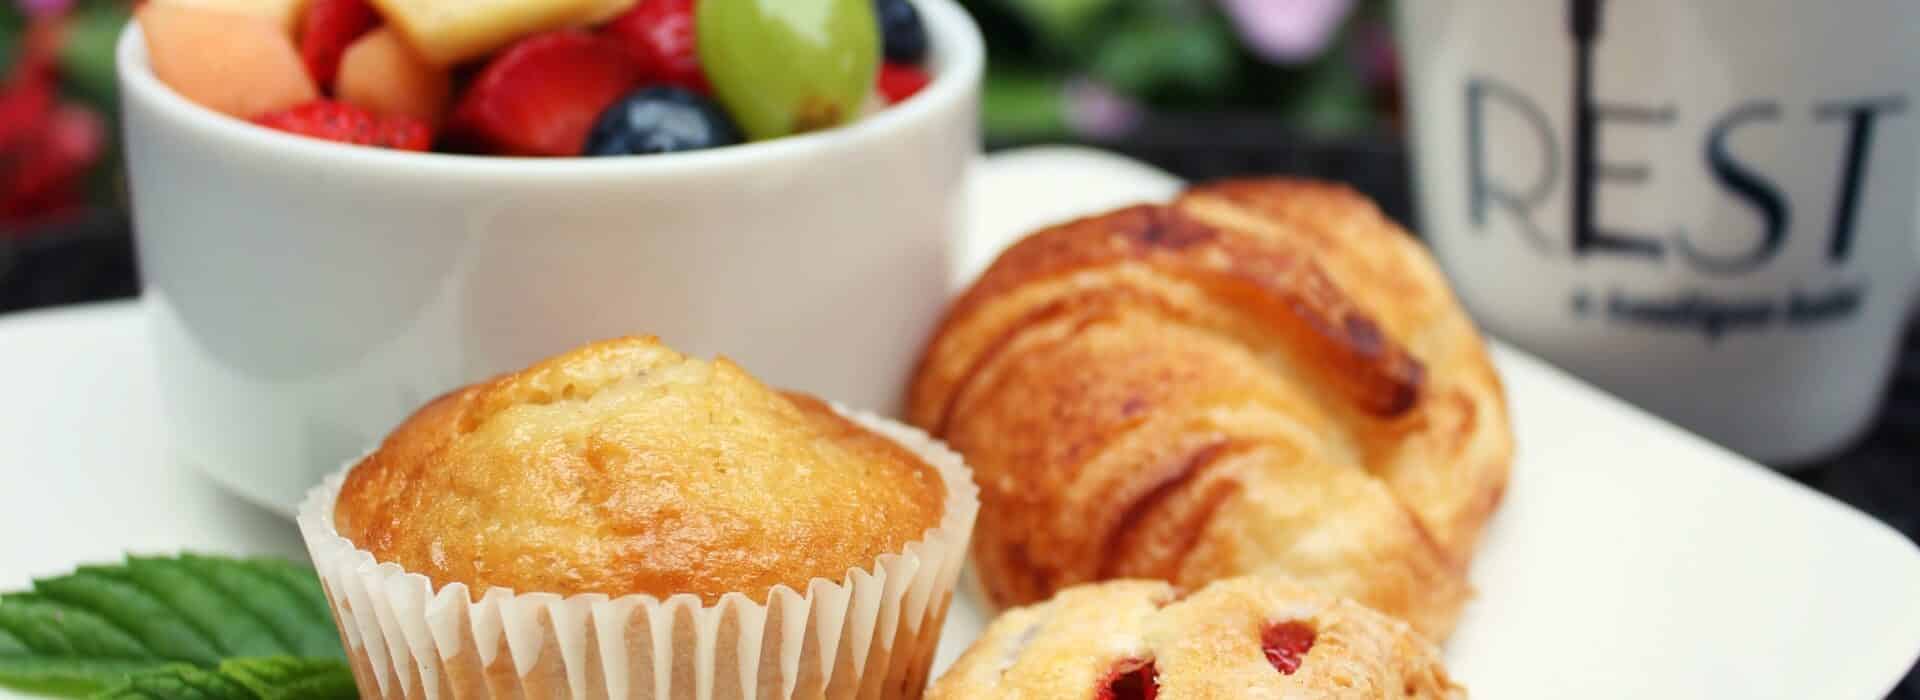 muffins and pastries on a plate with a bowl of fruit, and a mug that says REST with a key